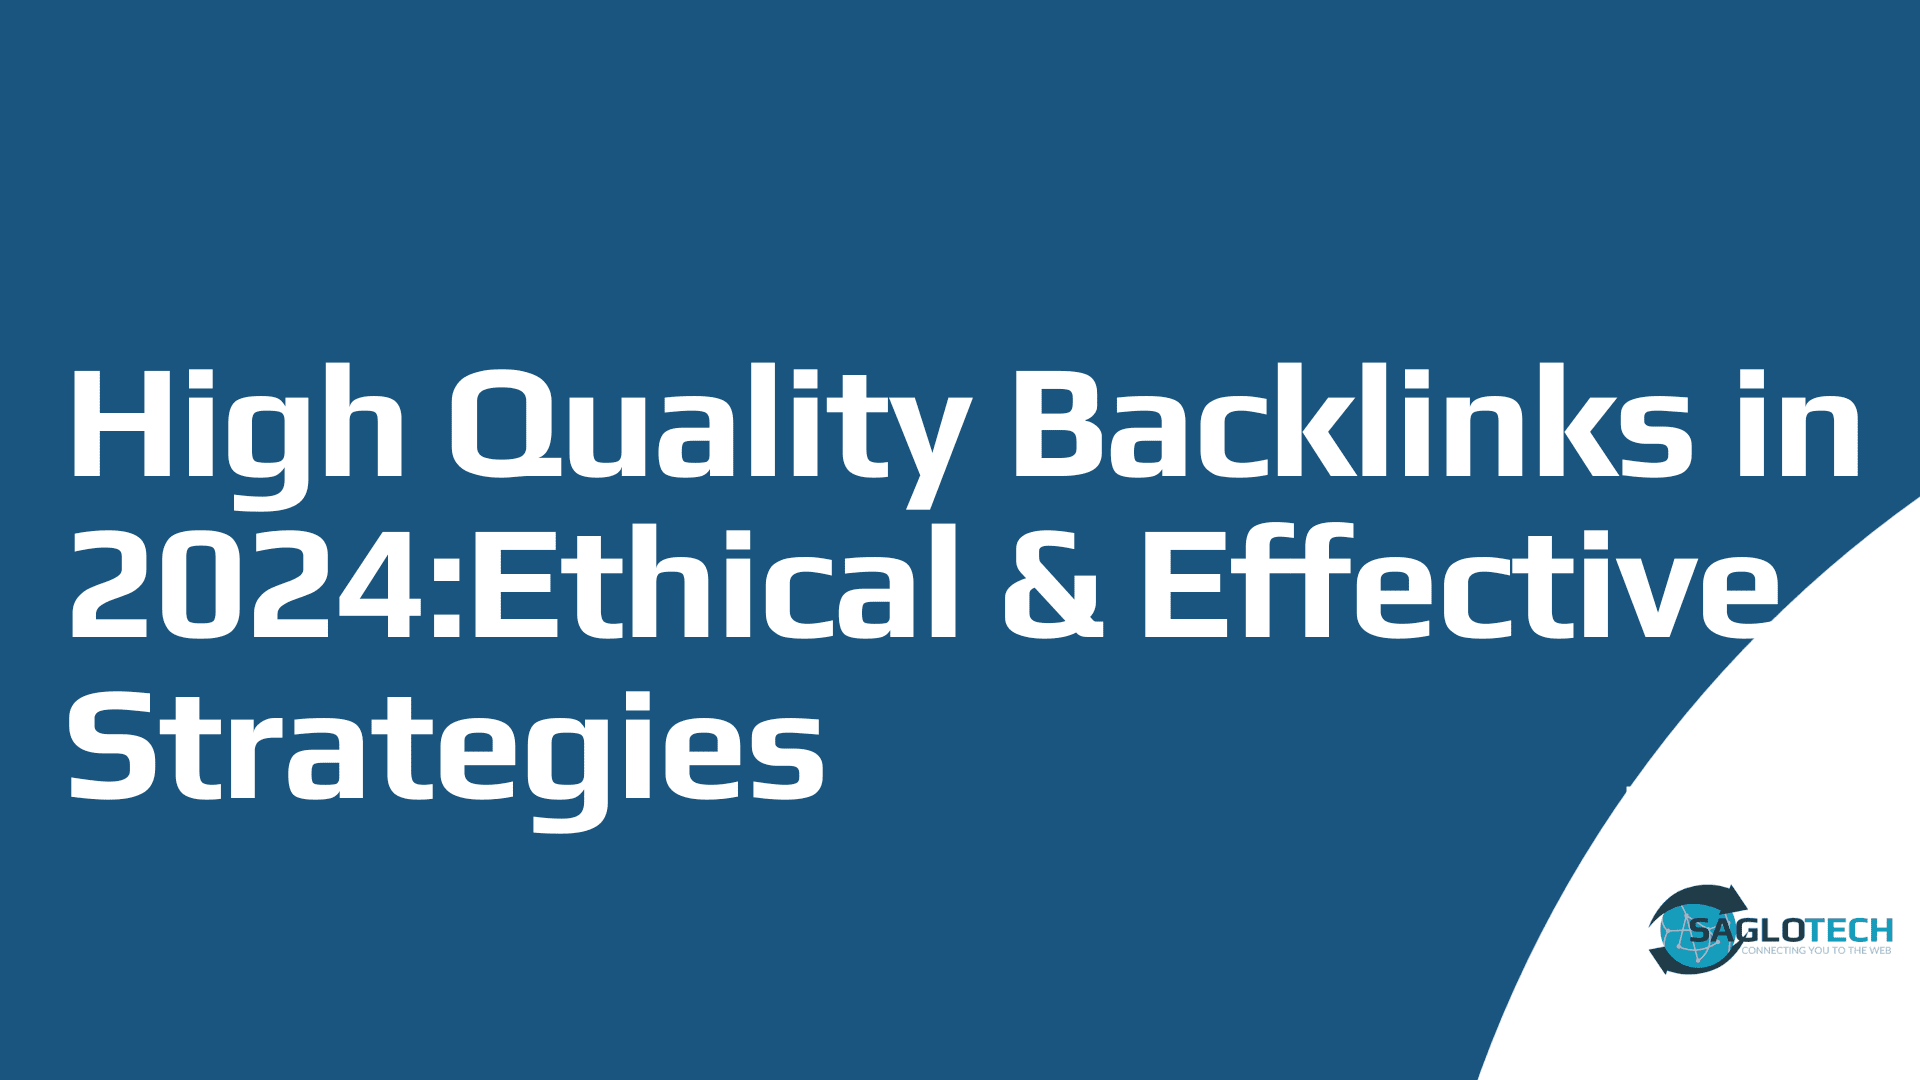 Building High-Quality Backlinks in 2024: Ethical and Effective Strategies